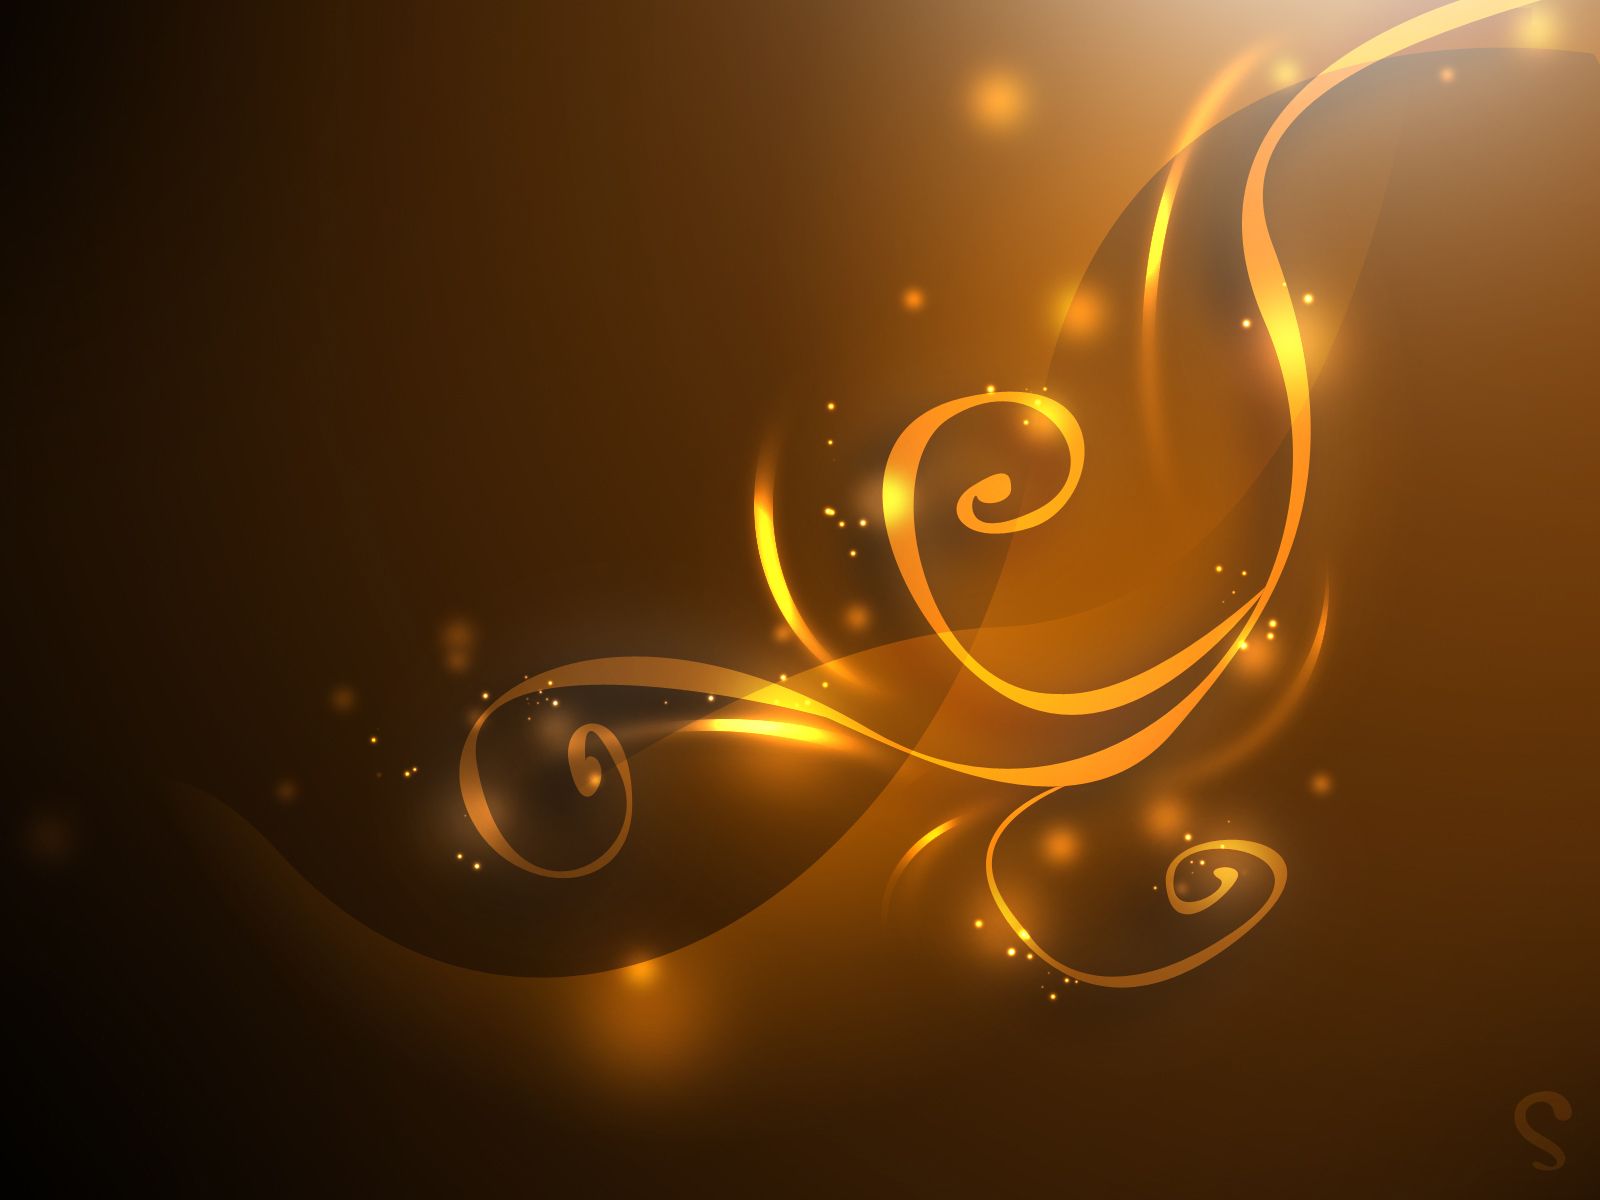 Gold Curves Quality Image And Transparent PNG Free Clipart